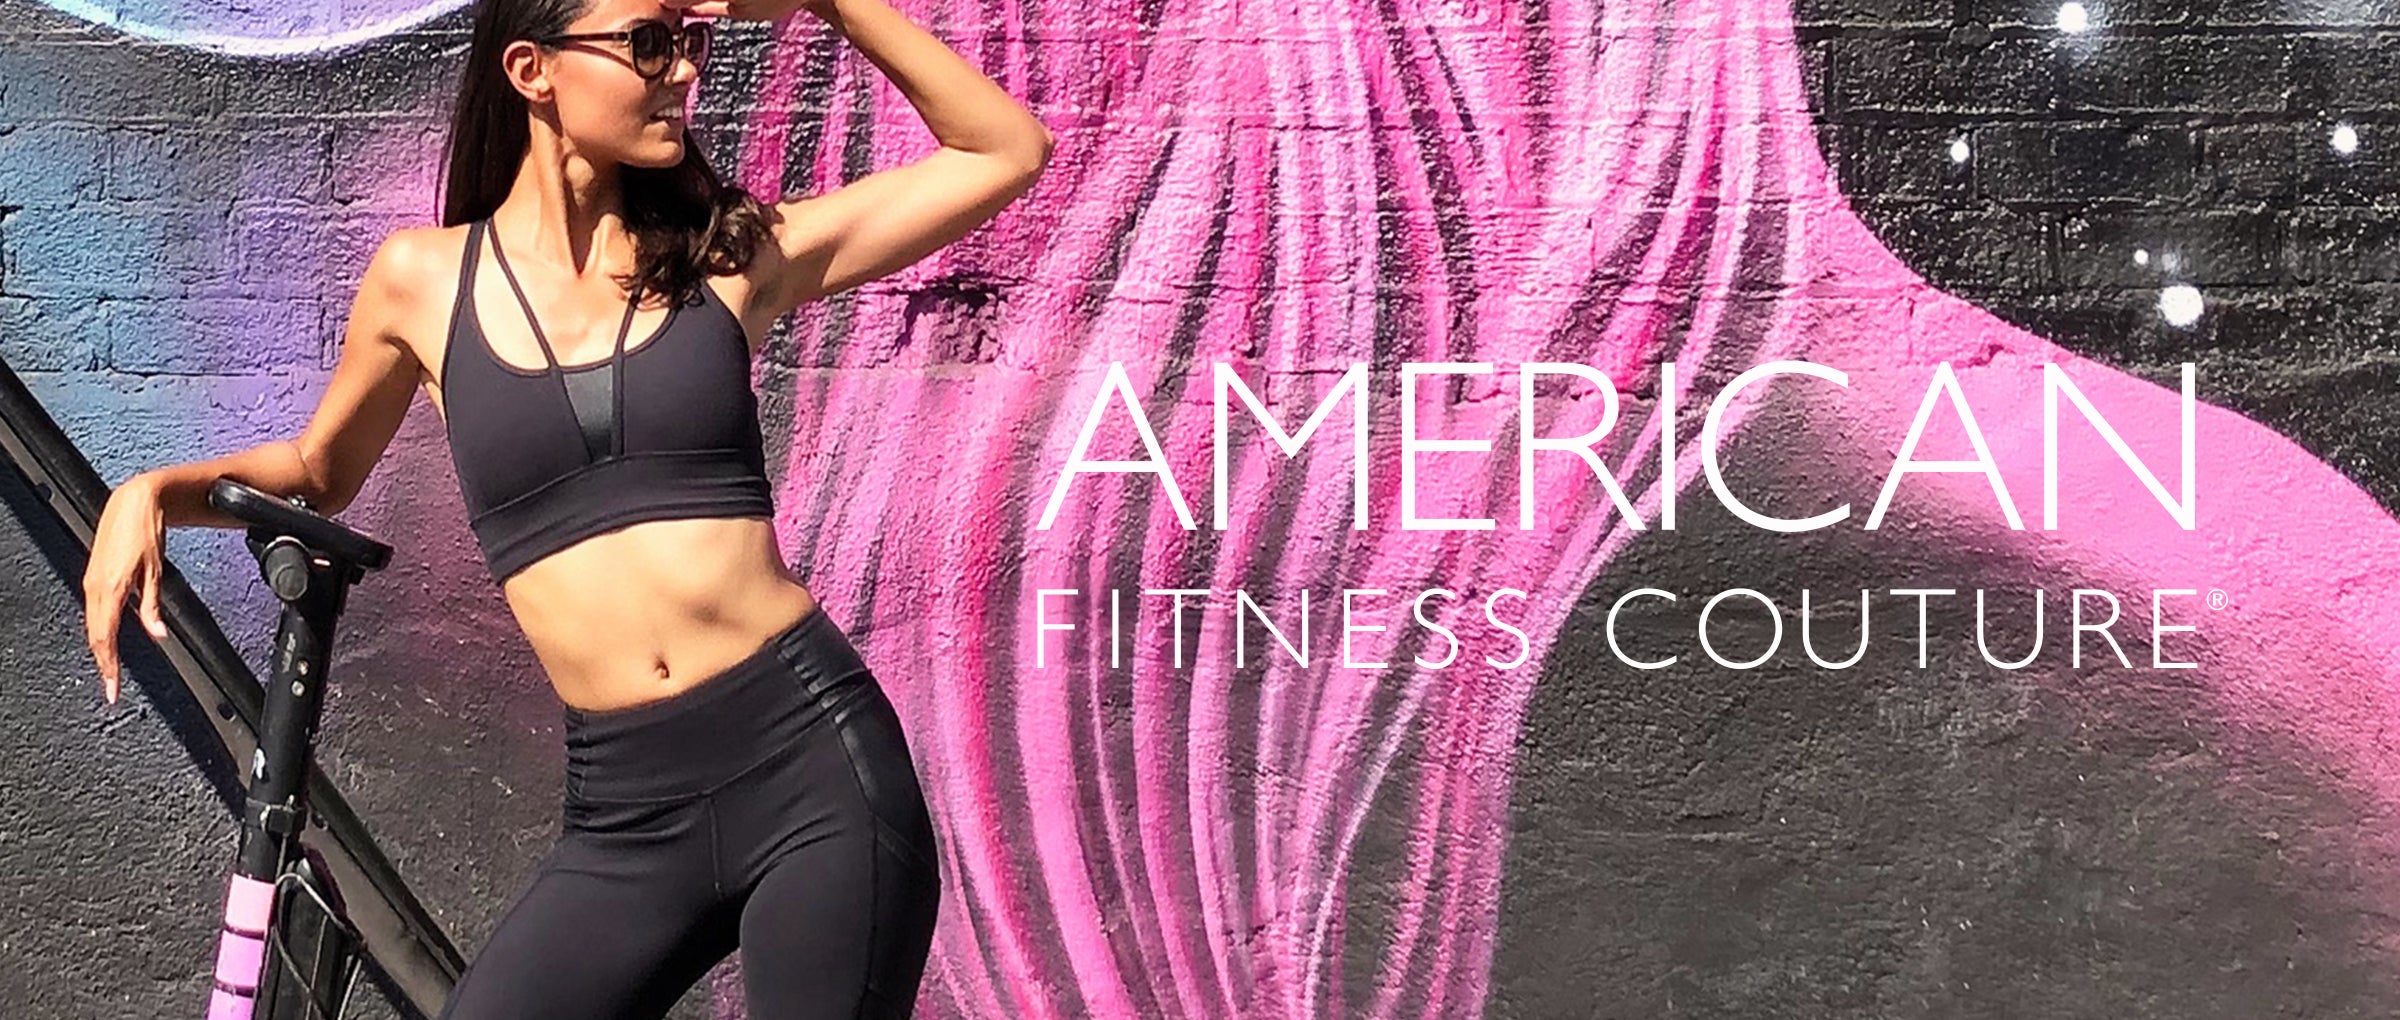 American Fitness Couture Mission | Model wears black leggings and strappy bra in front of graffiti wall.